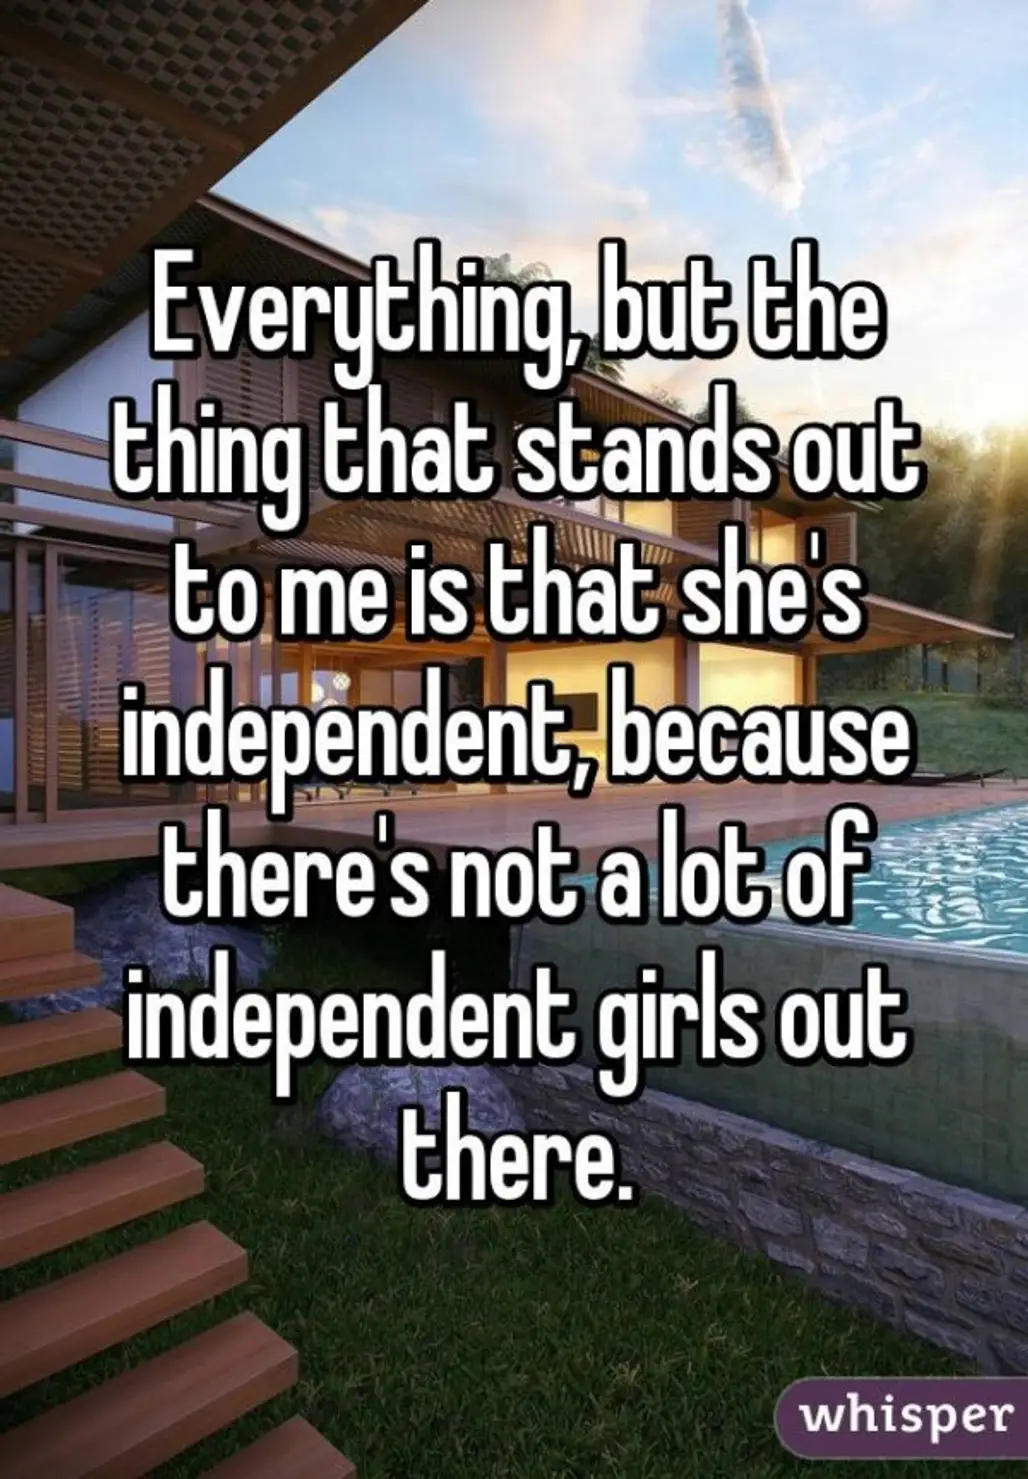 She's Independent